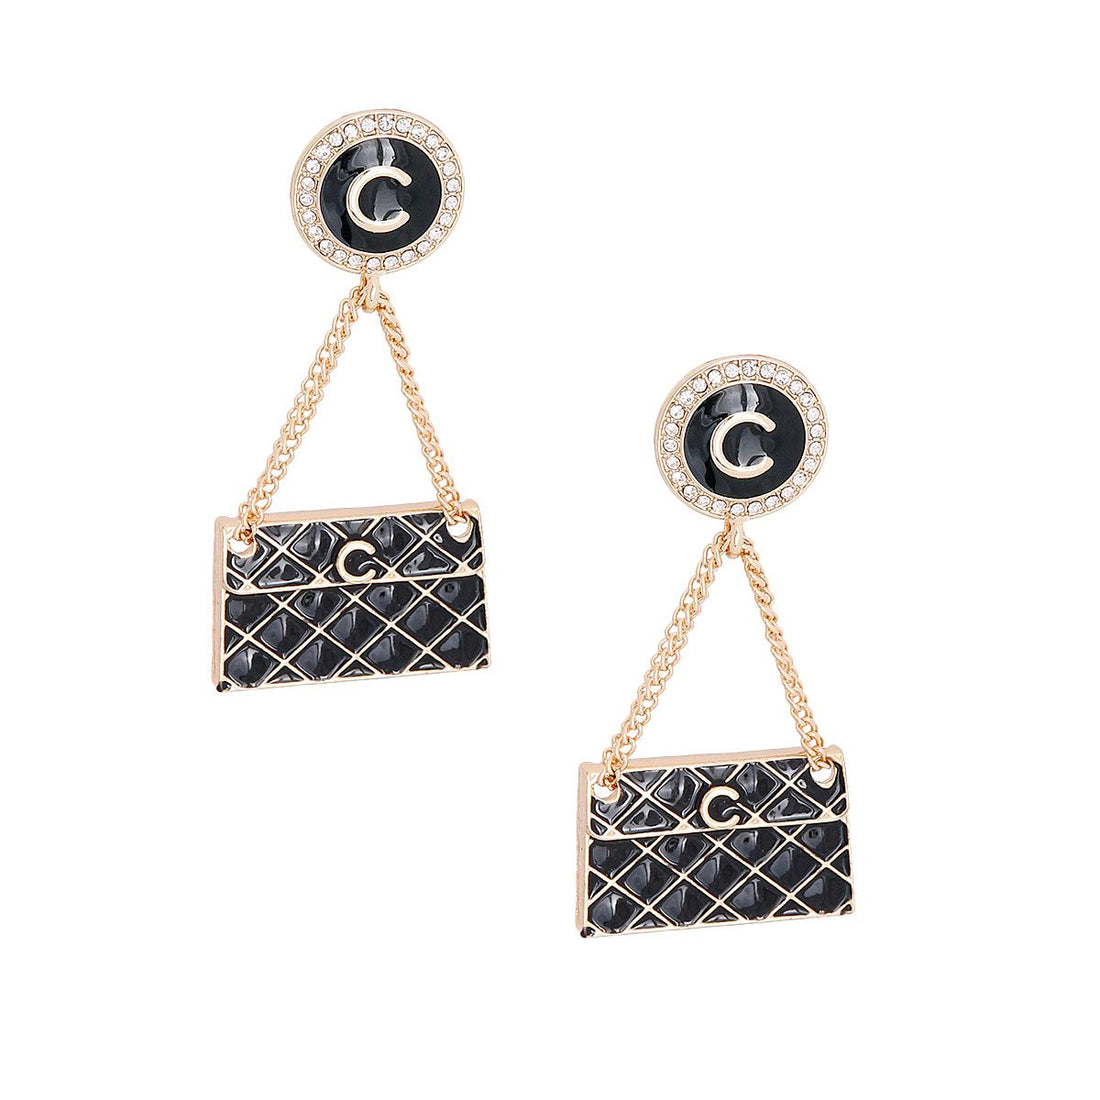 Black Quilted Bag Gold Earrings